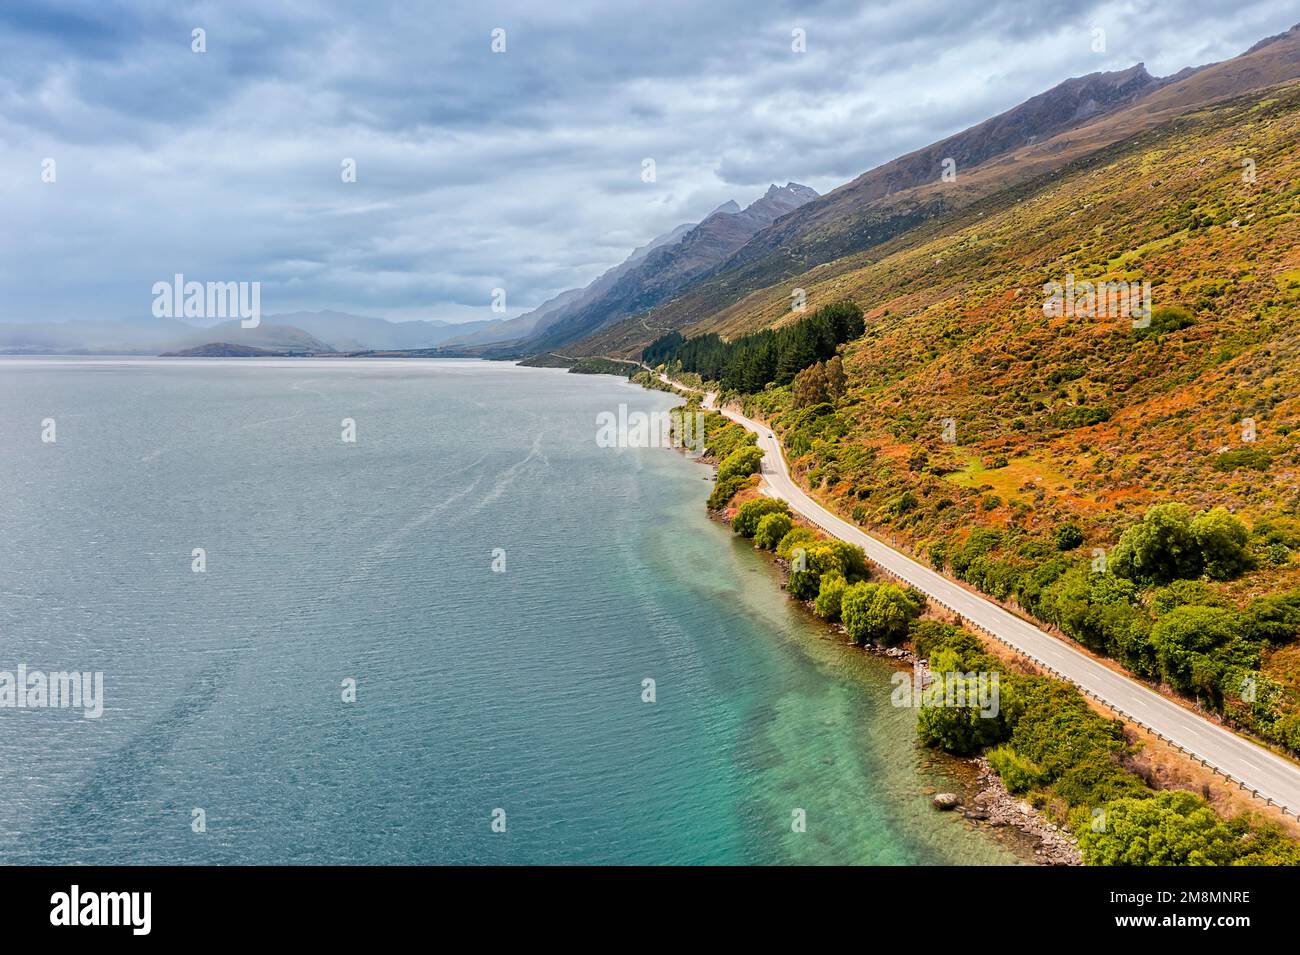 Remote highway along Wakatipu lake in South island of New Zealand under scenic mountain ranges on a cloudy sunny day. Stock Photo